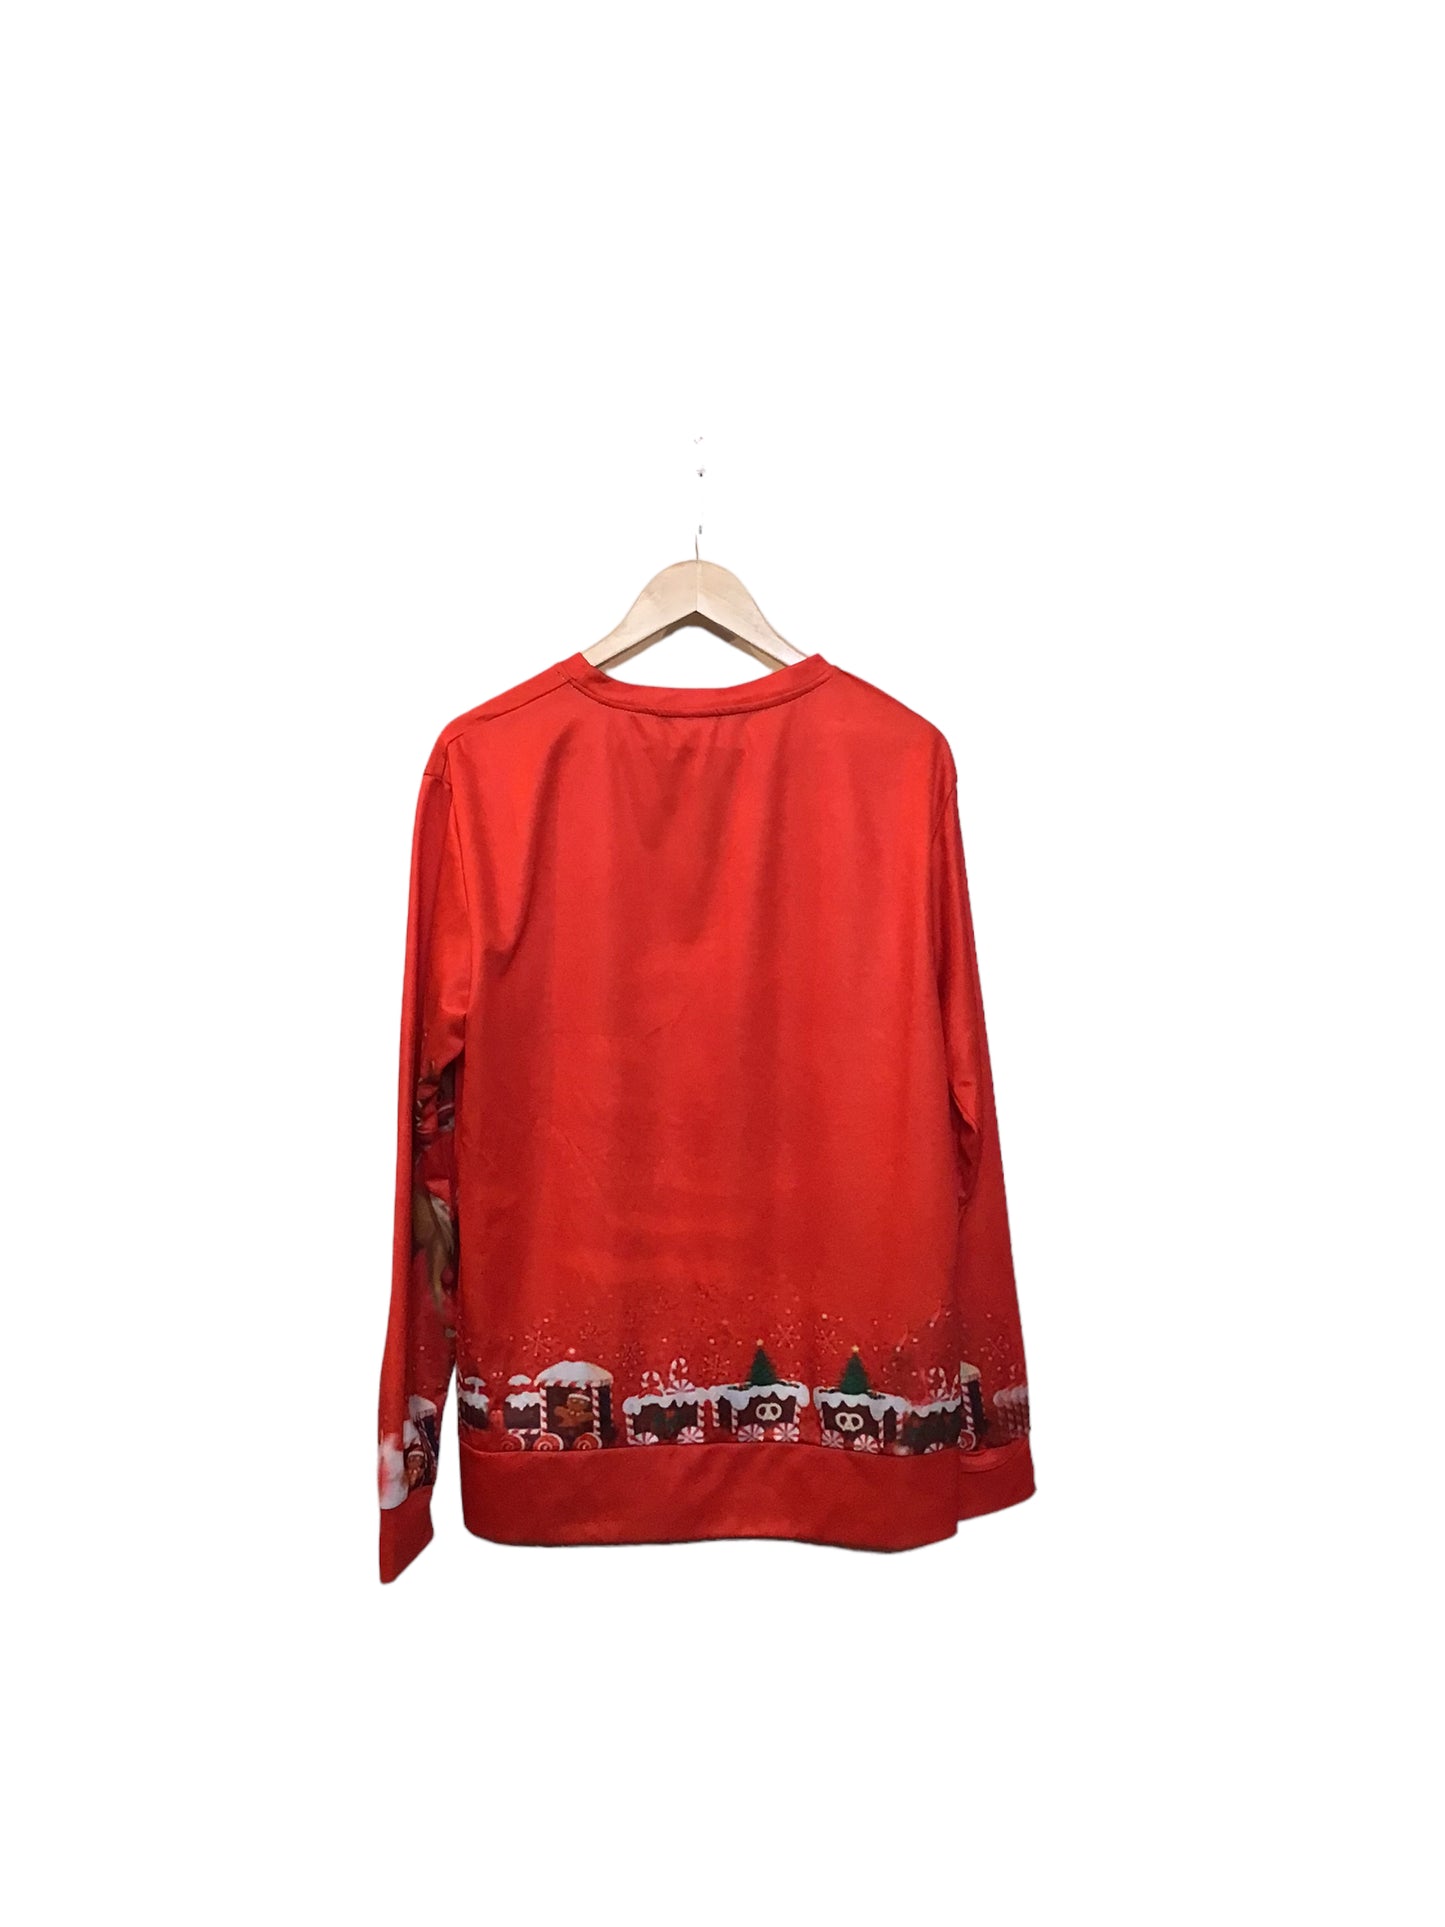 Red Christmas Sweater (Size L)